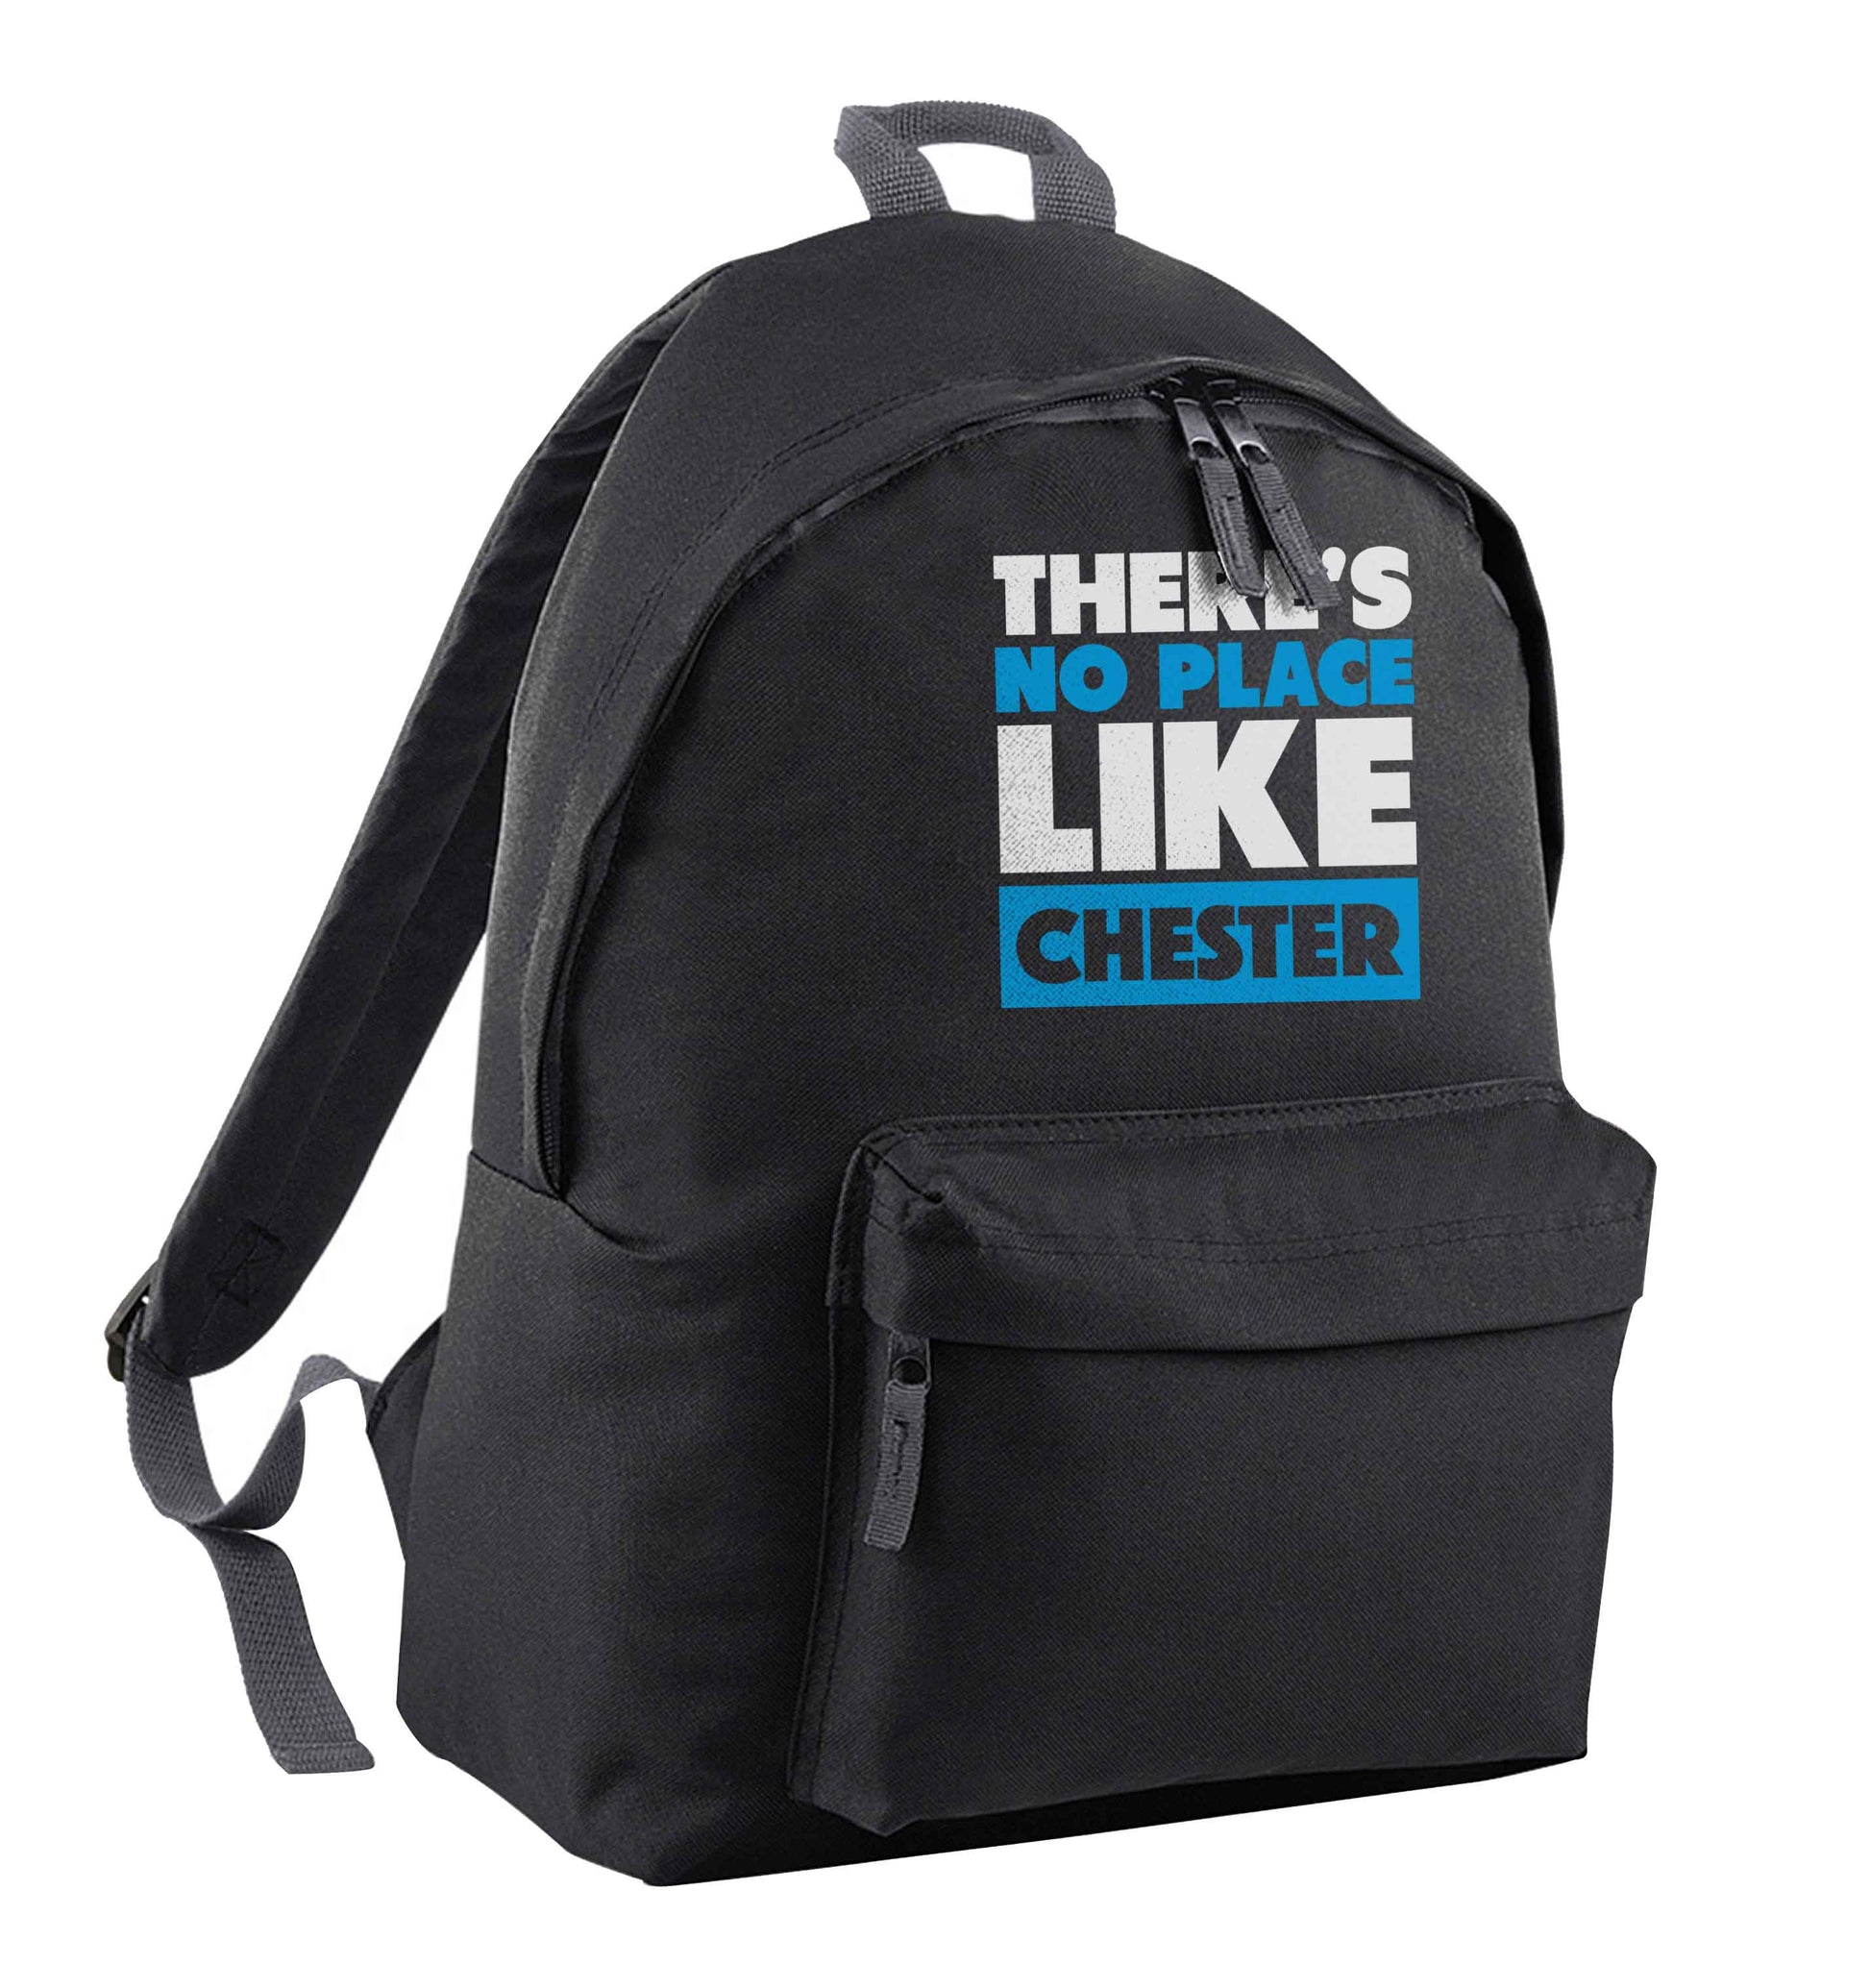 There's no place like Chester black children's backpack